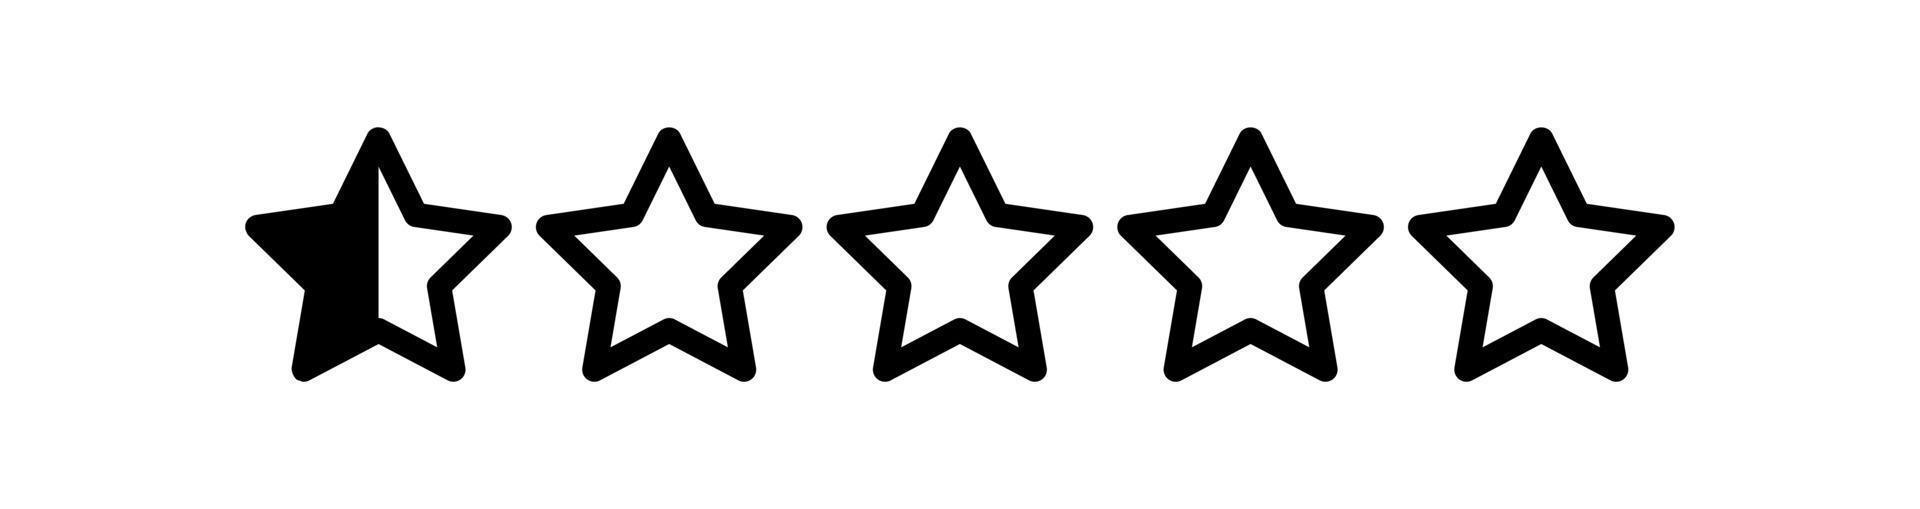 Half Stars Rating Vector illustration for any purposes.